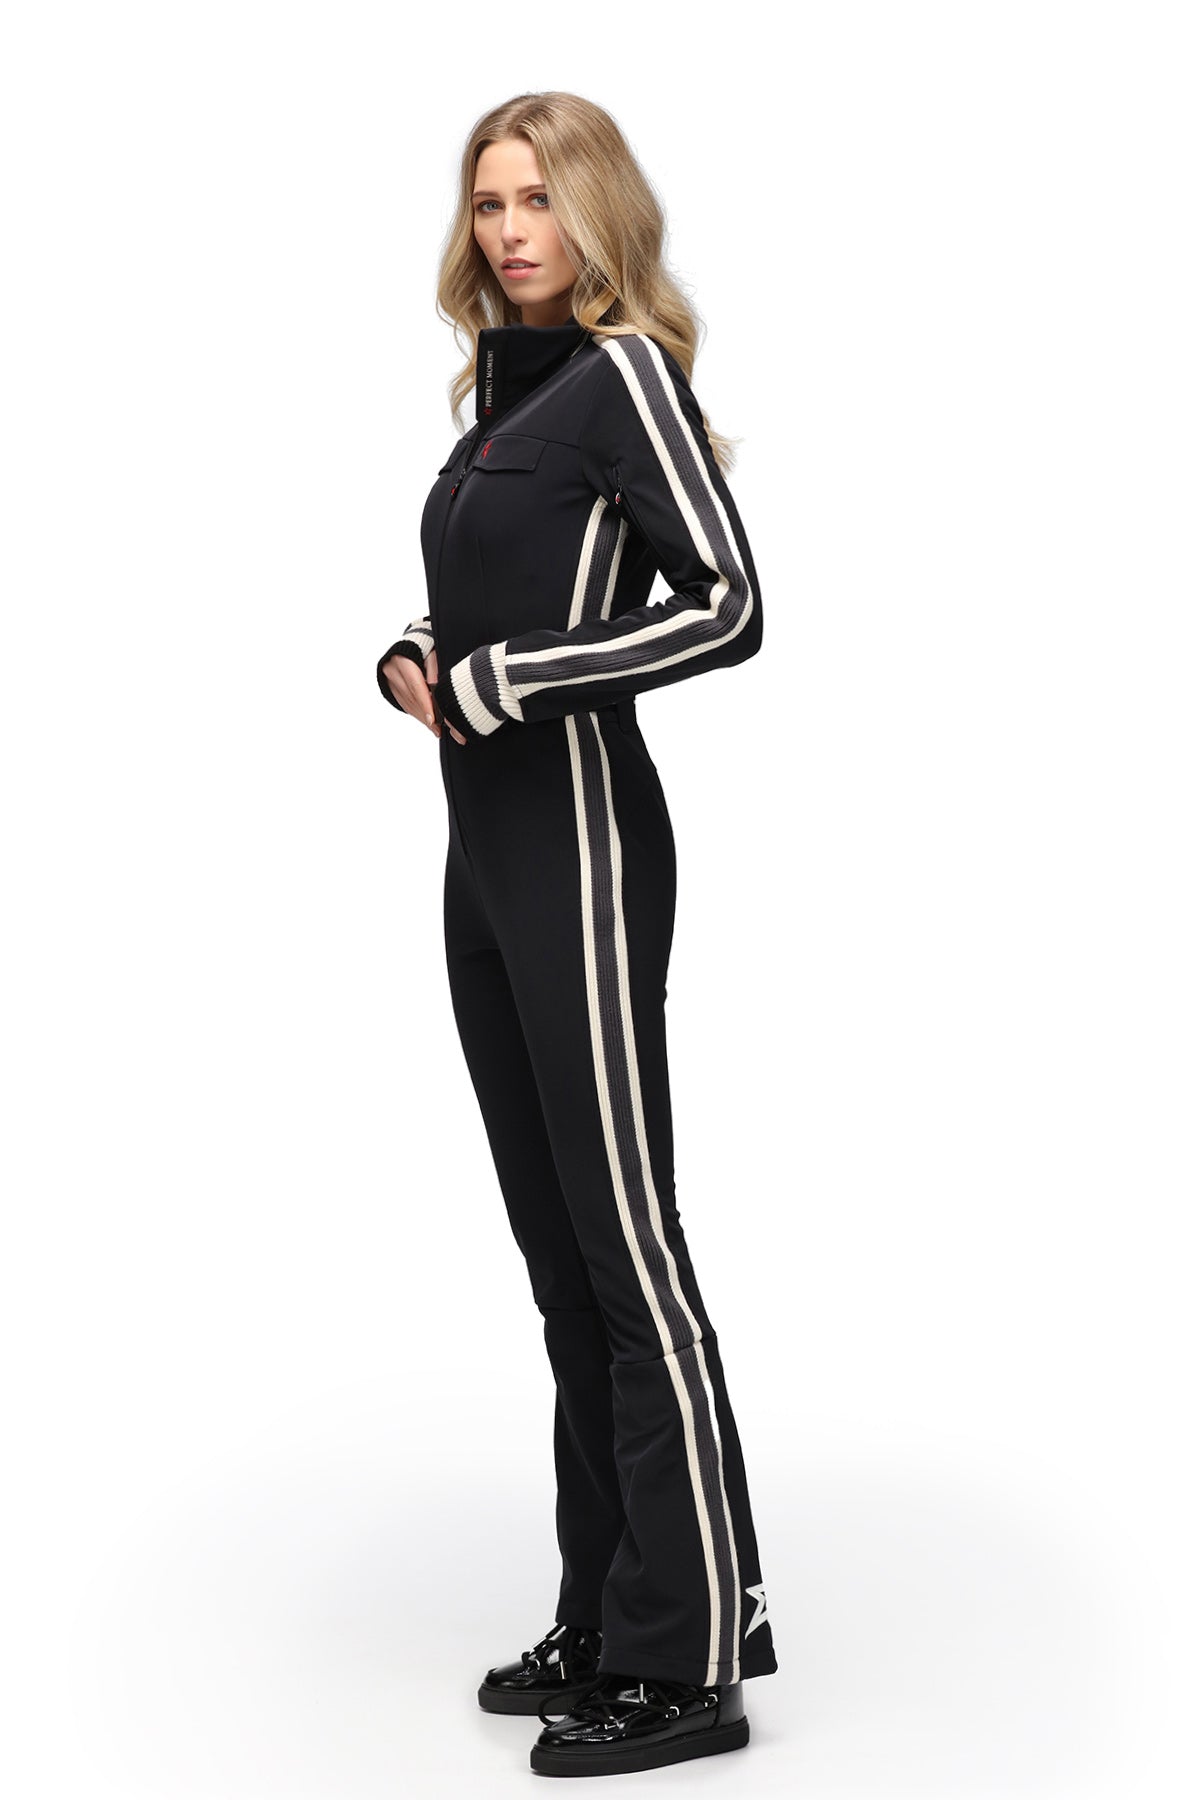 Perfect Moment Crystal One Piece Ski Suit in Black